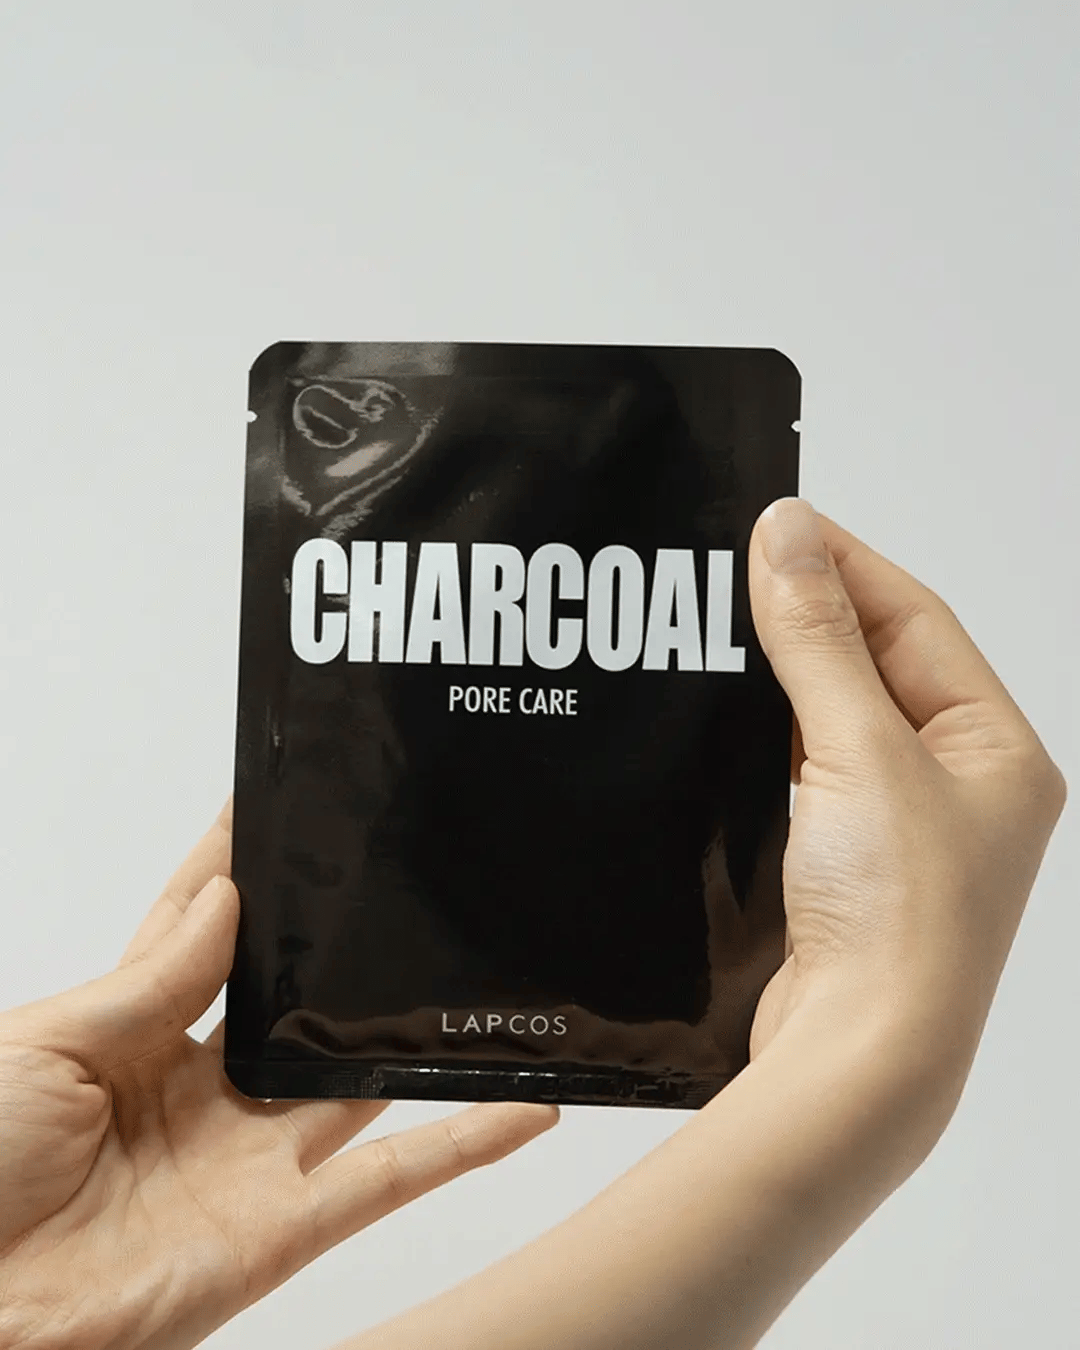 lapcos charcoal sheet mask video of the mask from heaven on earth